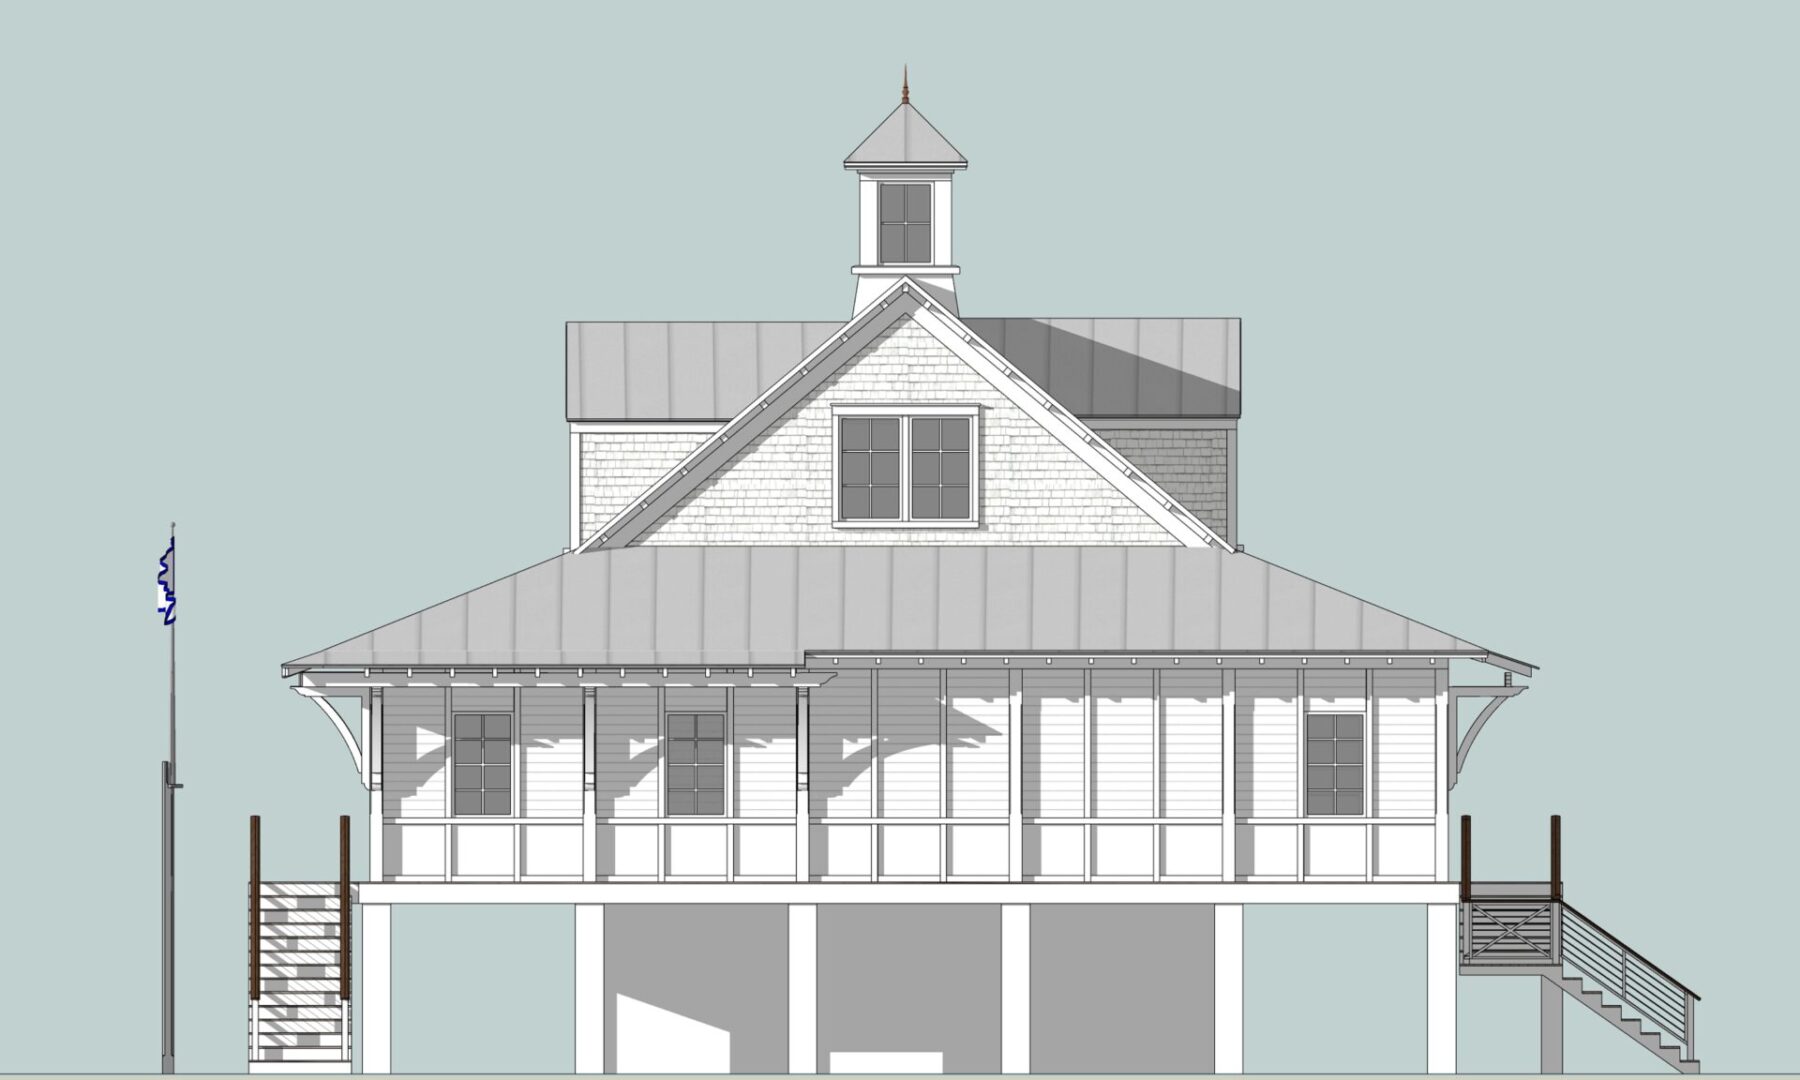 A pencil sketch of the wooden house with flag